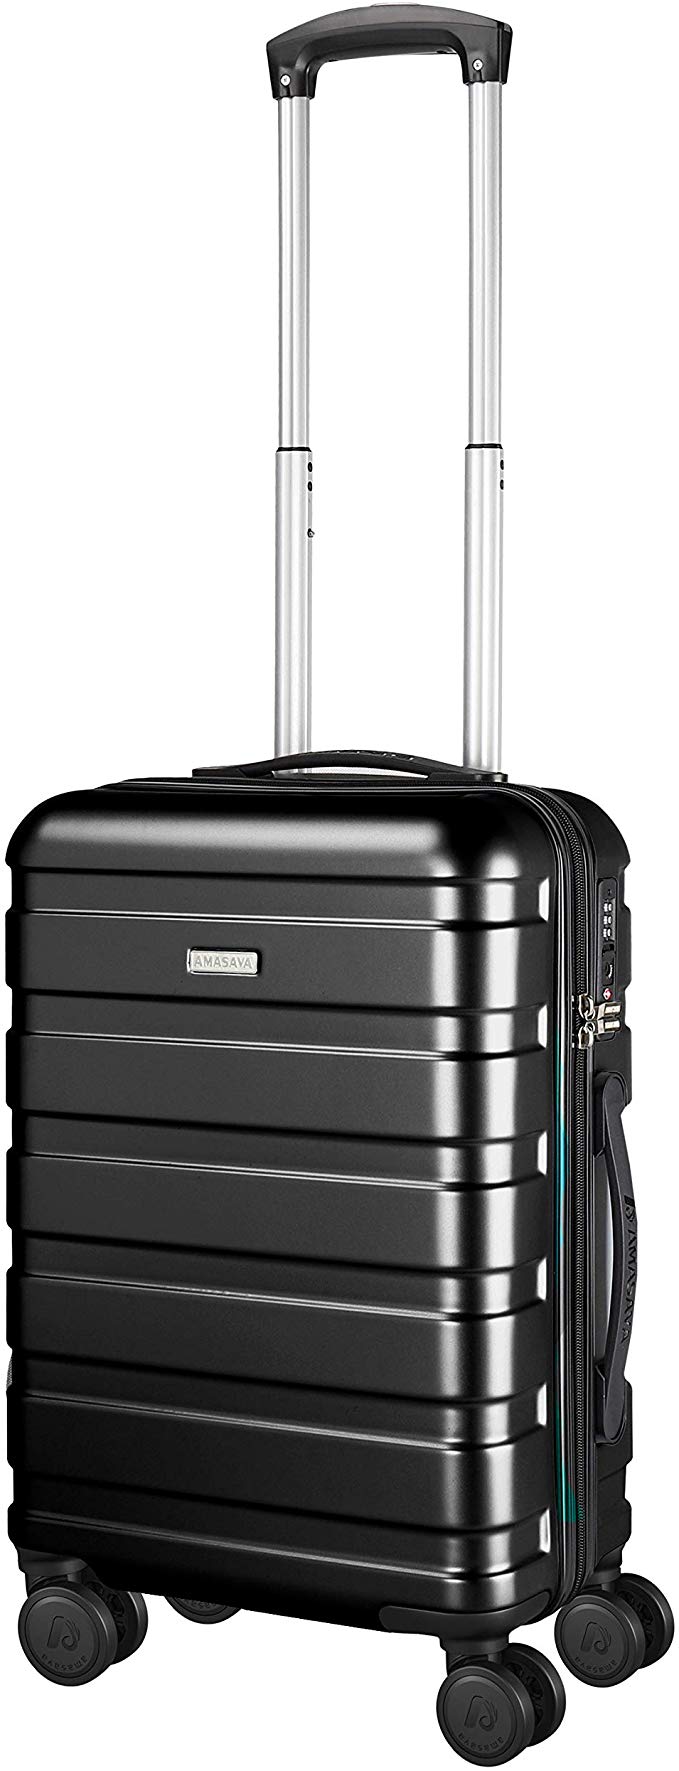 Amasava Hand Luggage Case Cabin Luggage 4 Wheels Carry On Trolley ABS & PC Hard Shell Lightweight Travel Suitcase, Small Suitcases (55cmx32cmx21cm, Black)